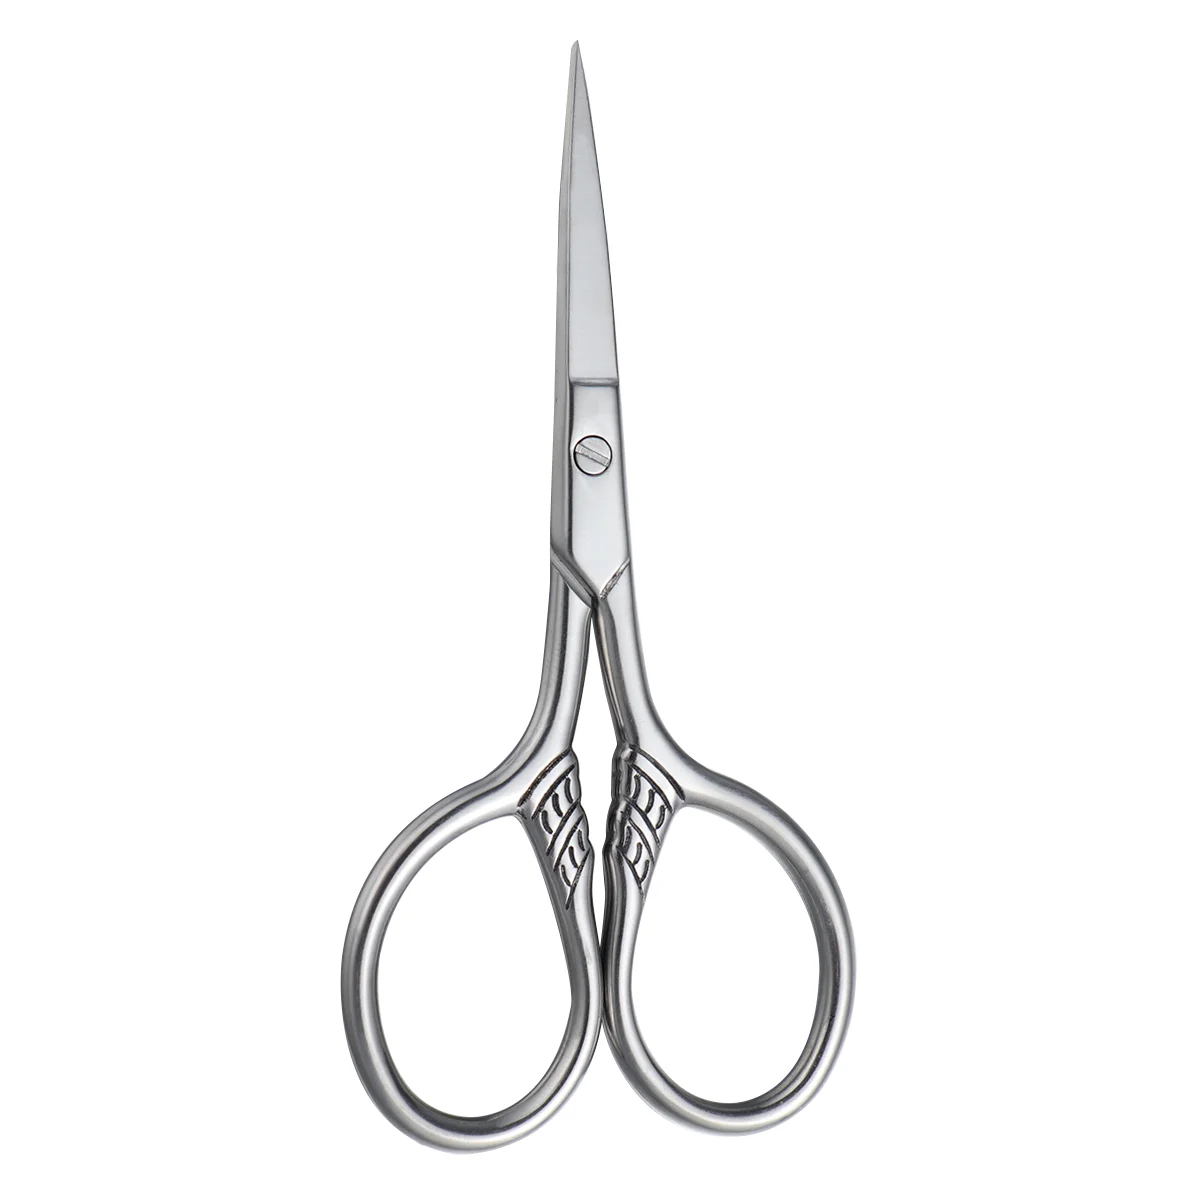 Stainless Steel Nose Hair& Beard Trimming Mustache Trimming Shear Professional Hair Scissor Small Grooming for Men Silver professional 6 0 inch hair scissors hairdresser scissors barber scissors set hair cutting shears scissor haircut shear